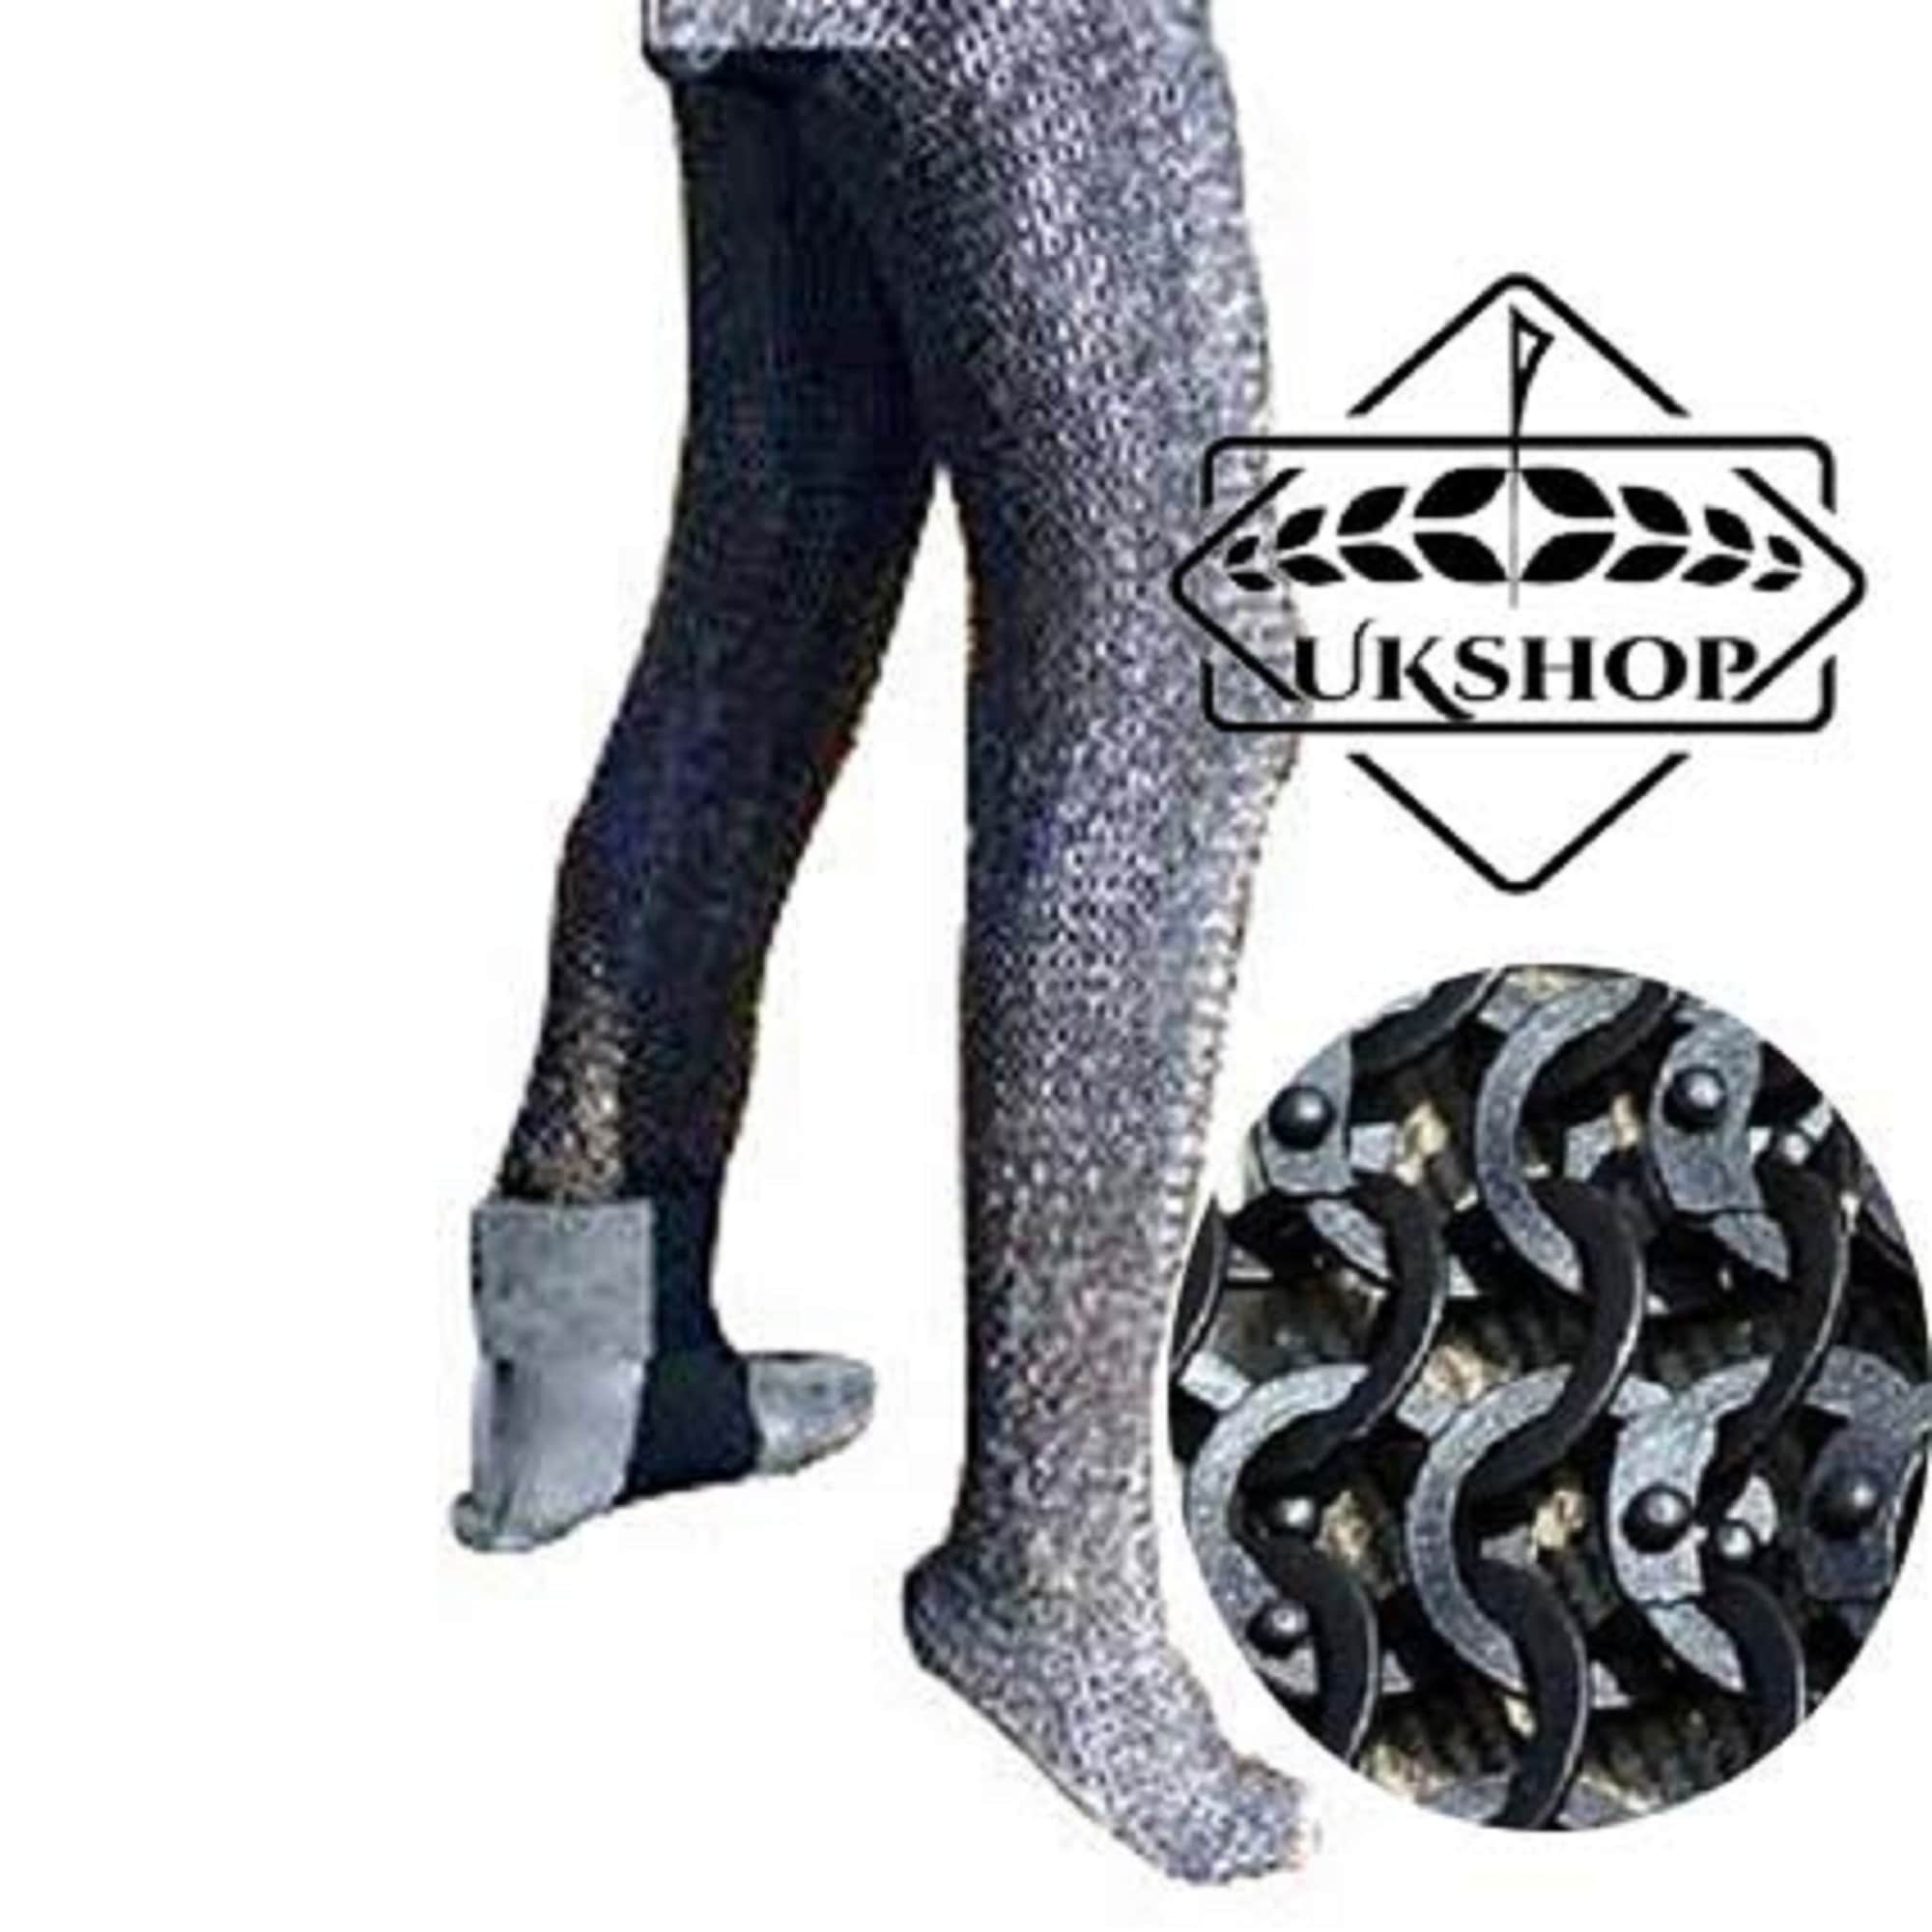 Chain Mail Chausses Leggings, 9mm Round Riveted With Solid Rings Leggings,  UKE-092 Valentine's Day -  Norway